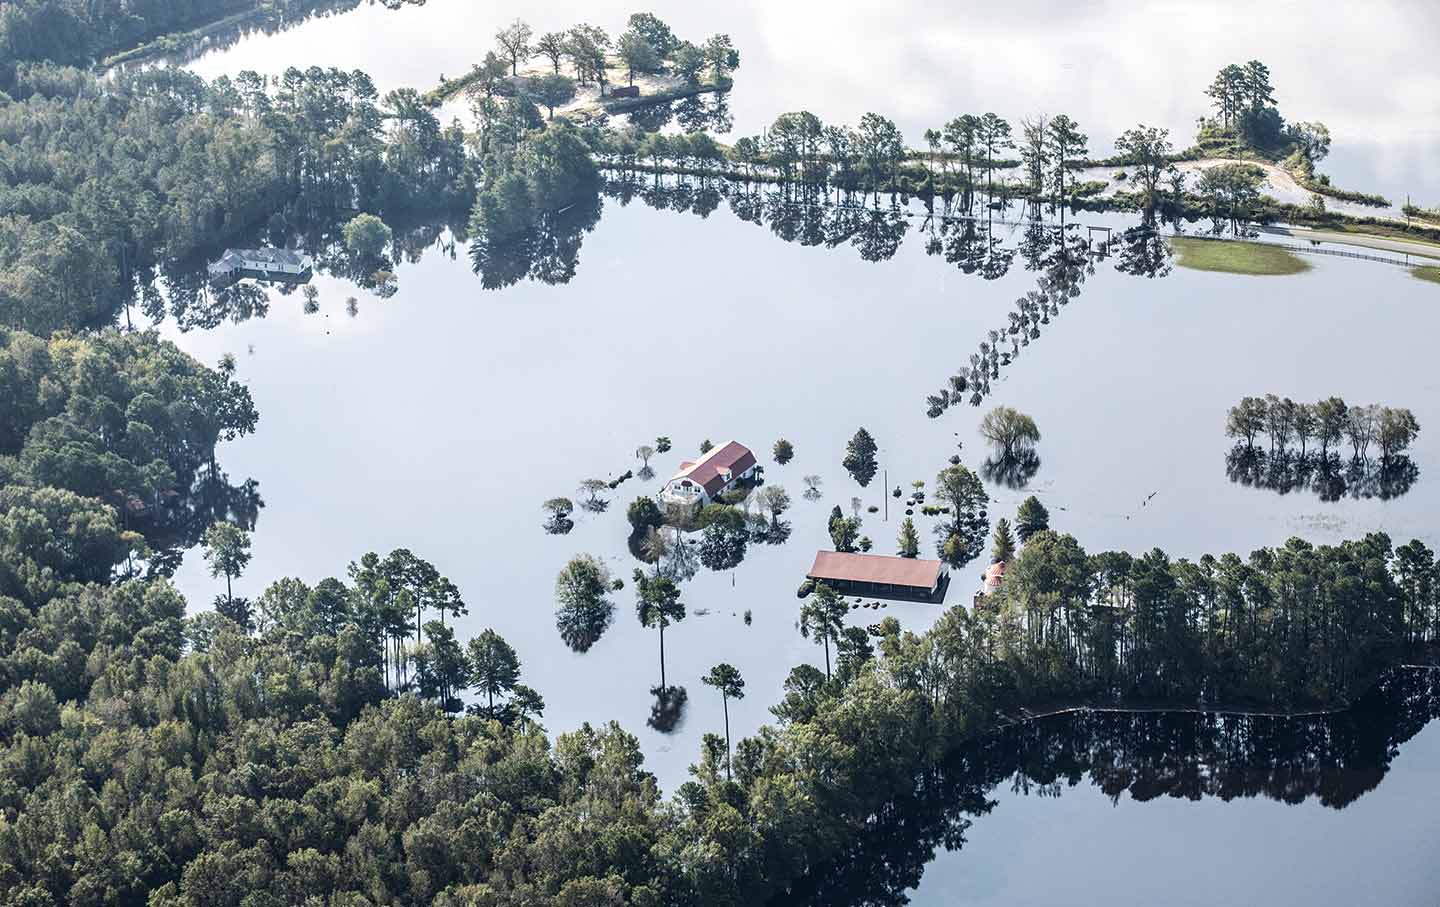 Floodwater after Hurricane Florence in North Carolina.